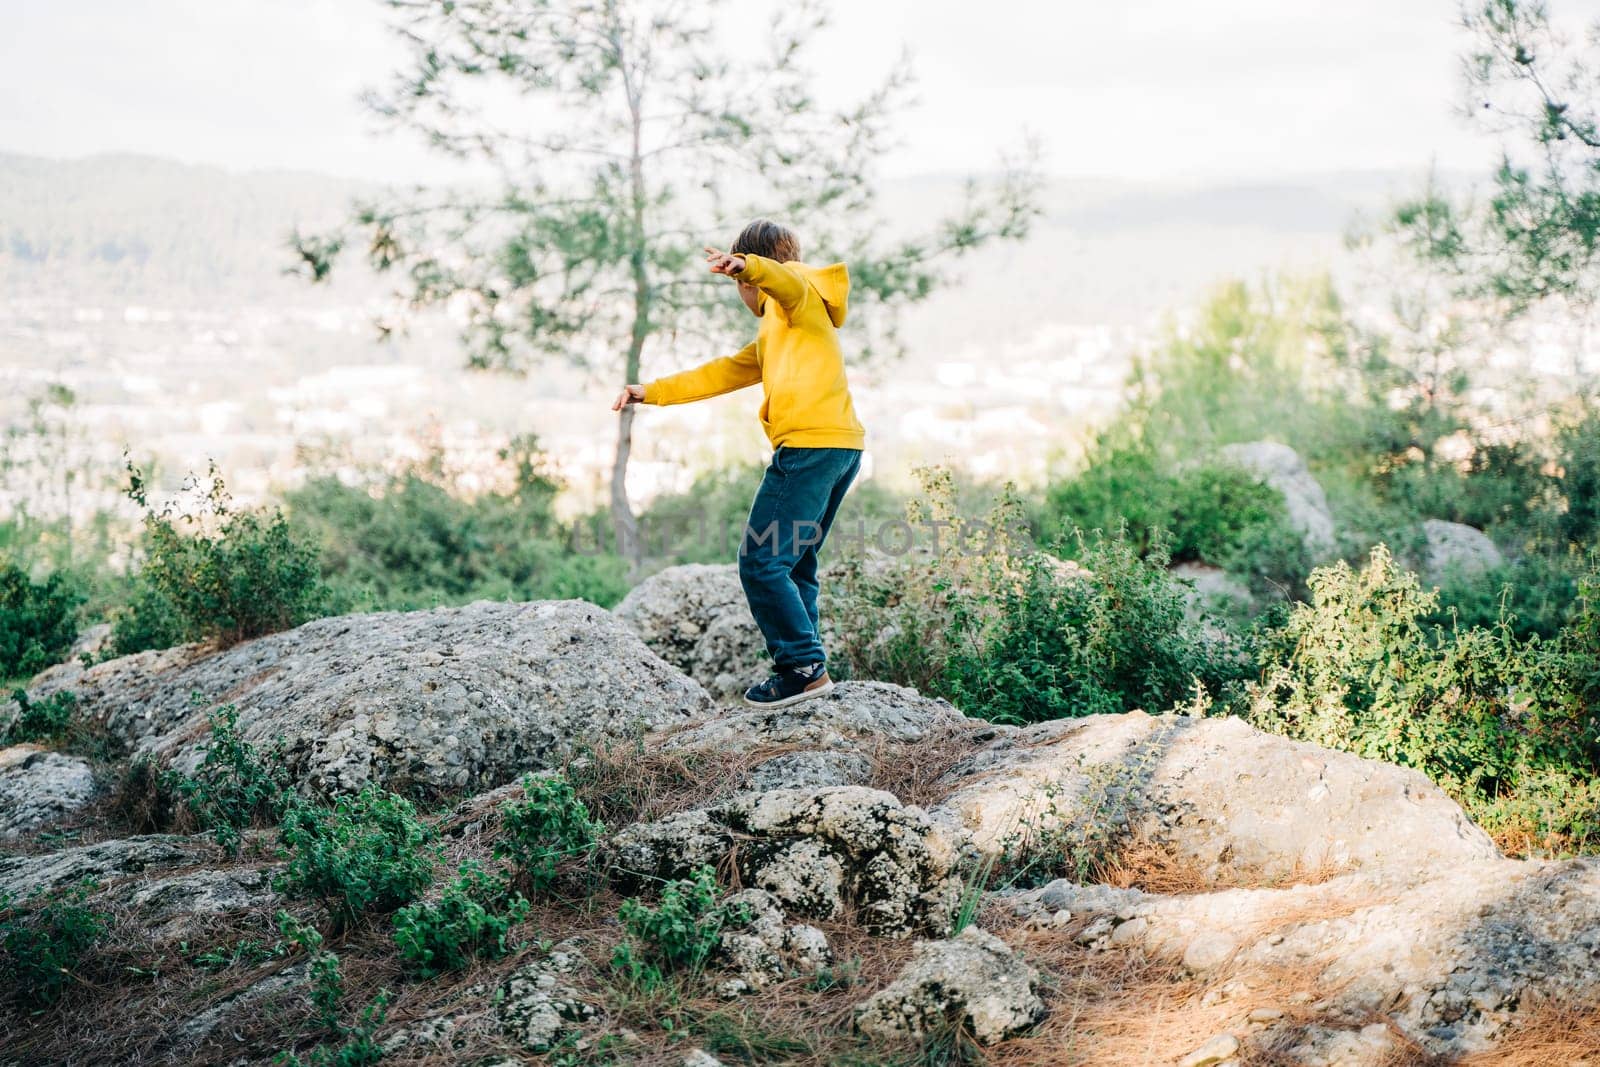 School kid child in vibrant clothes jumping over granite rock boulders in the city park with mountain forest view in the background. Boy leaping across rocks in the park.